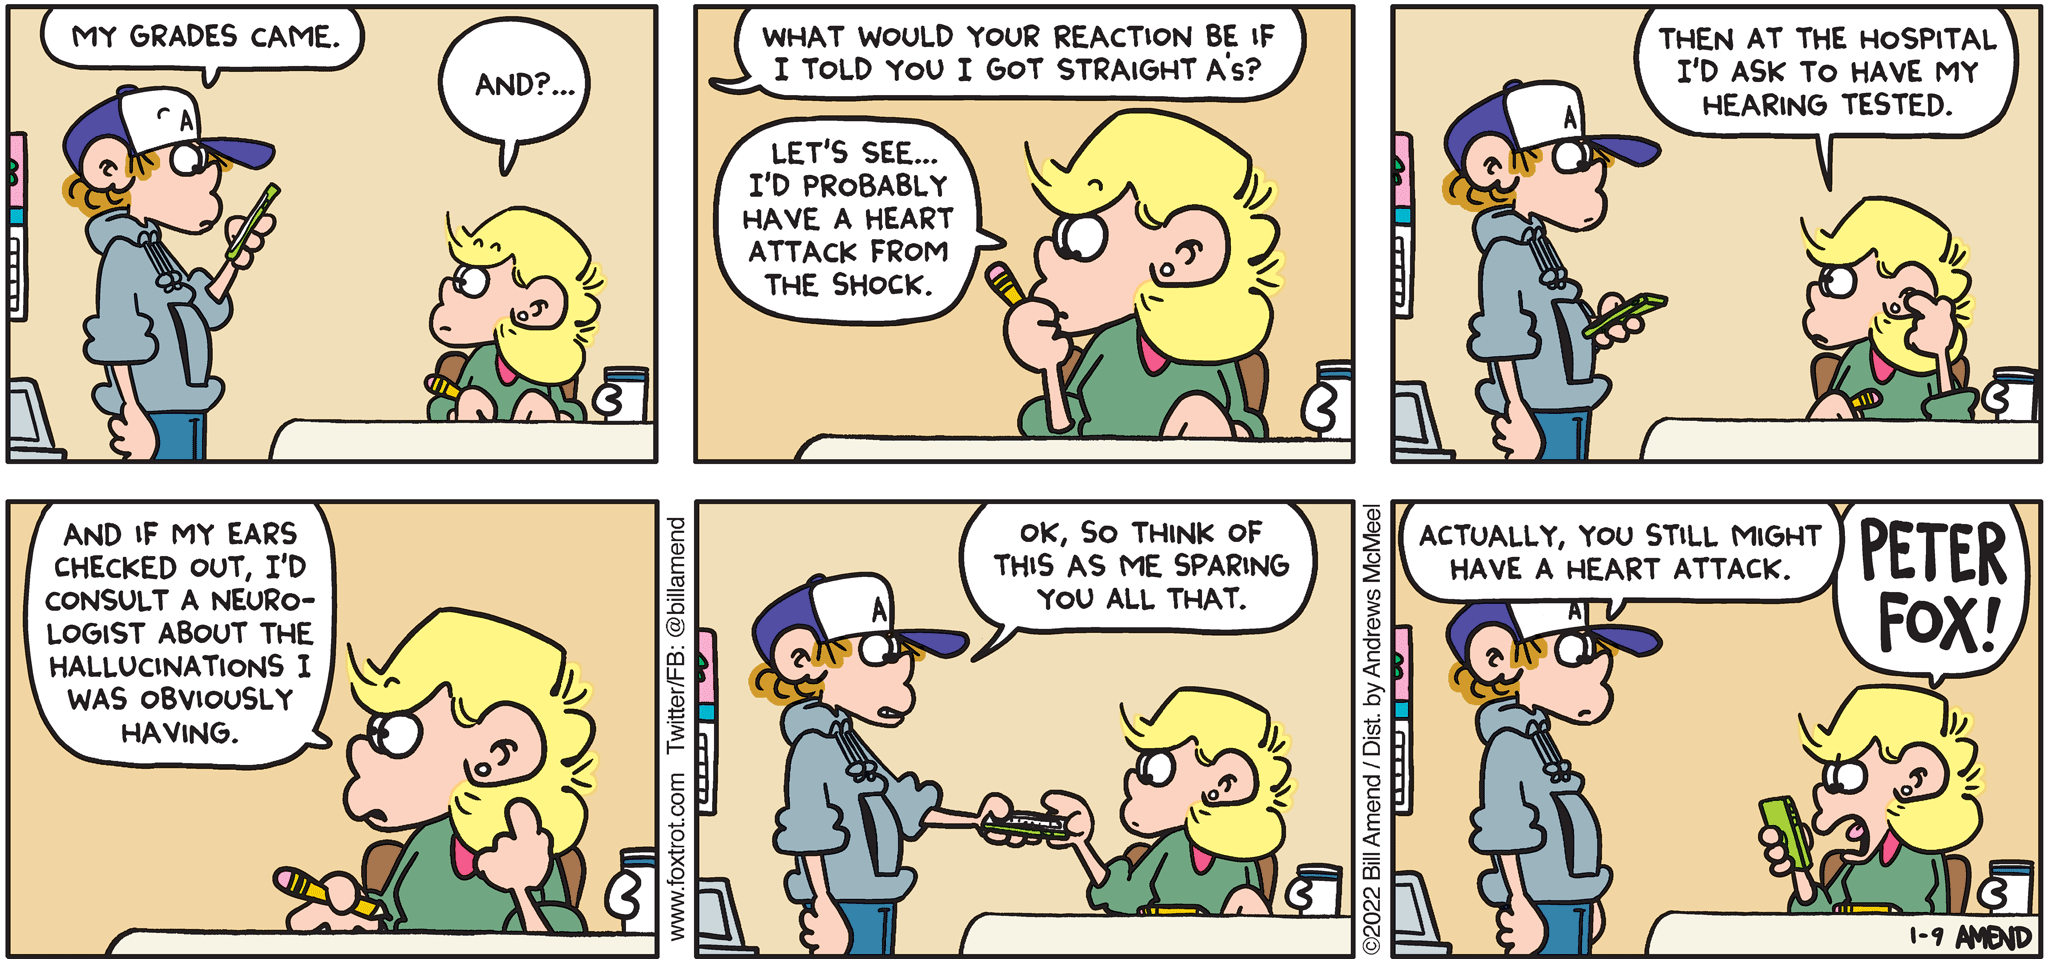 FoxTrot comic strip by Bill Amend - "Retrogrades" published January 2, 2022 - Transcript: Peter Fox: My grades came. Andy Fox: And?... Peter Fox: What would your reaction be if I told you I got strats A's? Andy: Let's see... I'd probably have a heart attack from the shock. Then at the hospital I'd ask to have my hearing tested. And if my ears checked out, I'd consult a neurologist about the hallucinations I was obviously having. Peter Fox: Ok, so think of this as me sparing you all that. Actually, you still might have a heart attack. Andy Fox: PETER FOX!